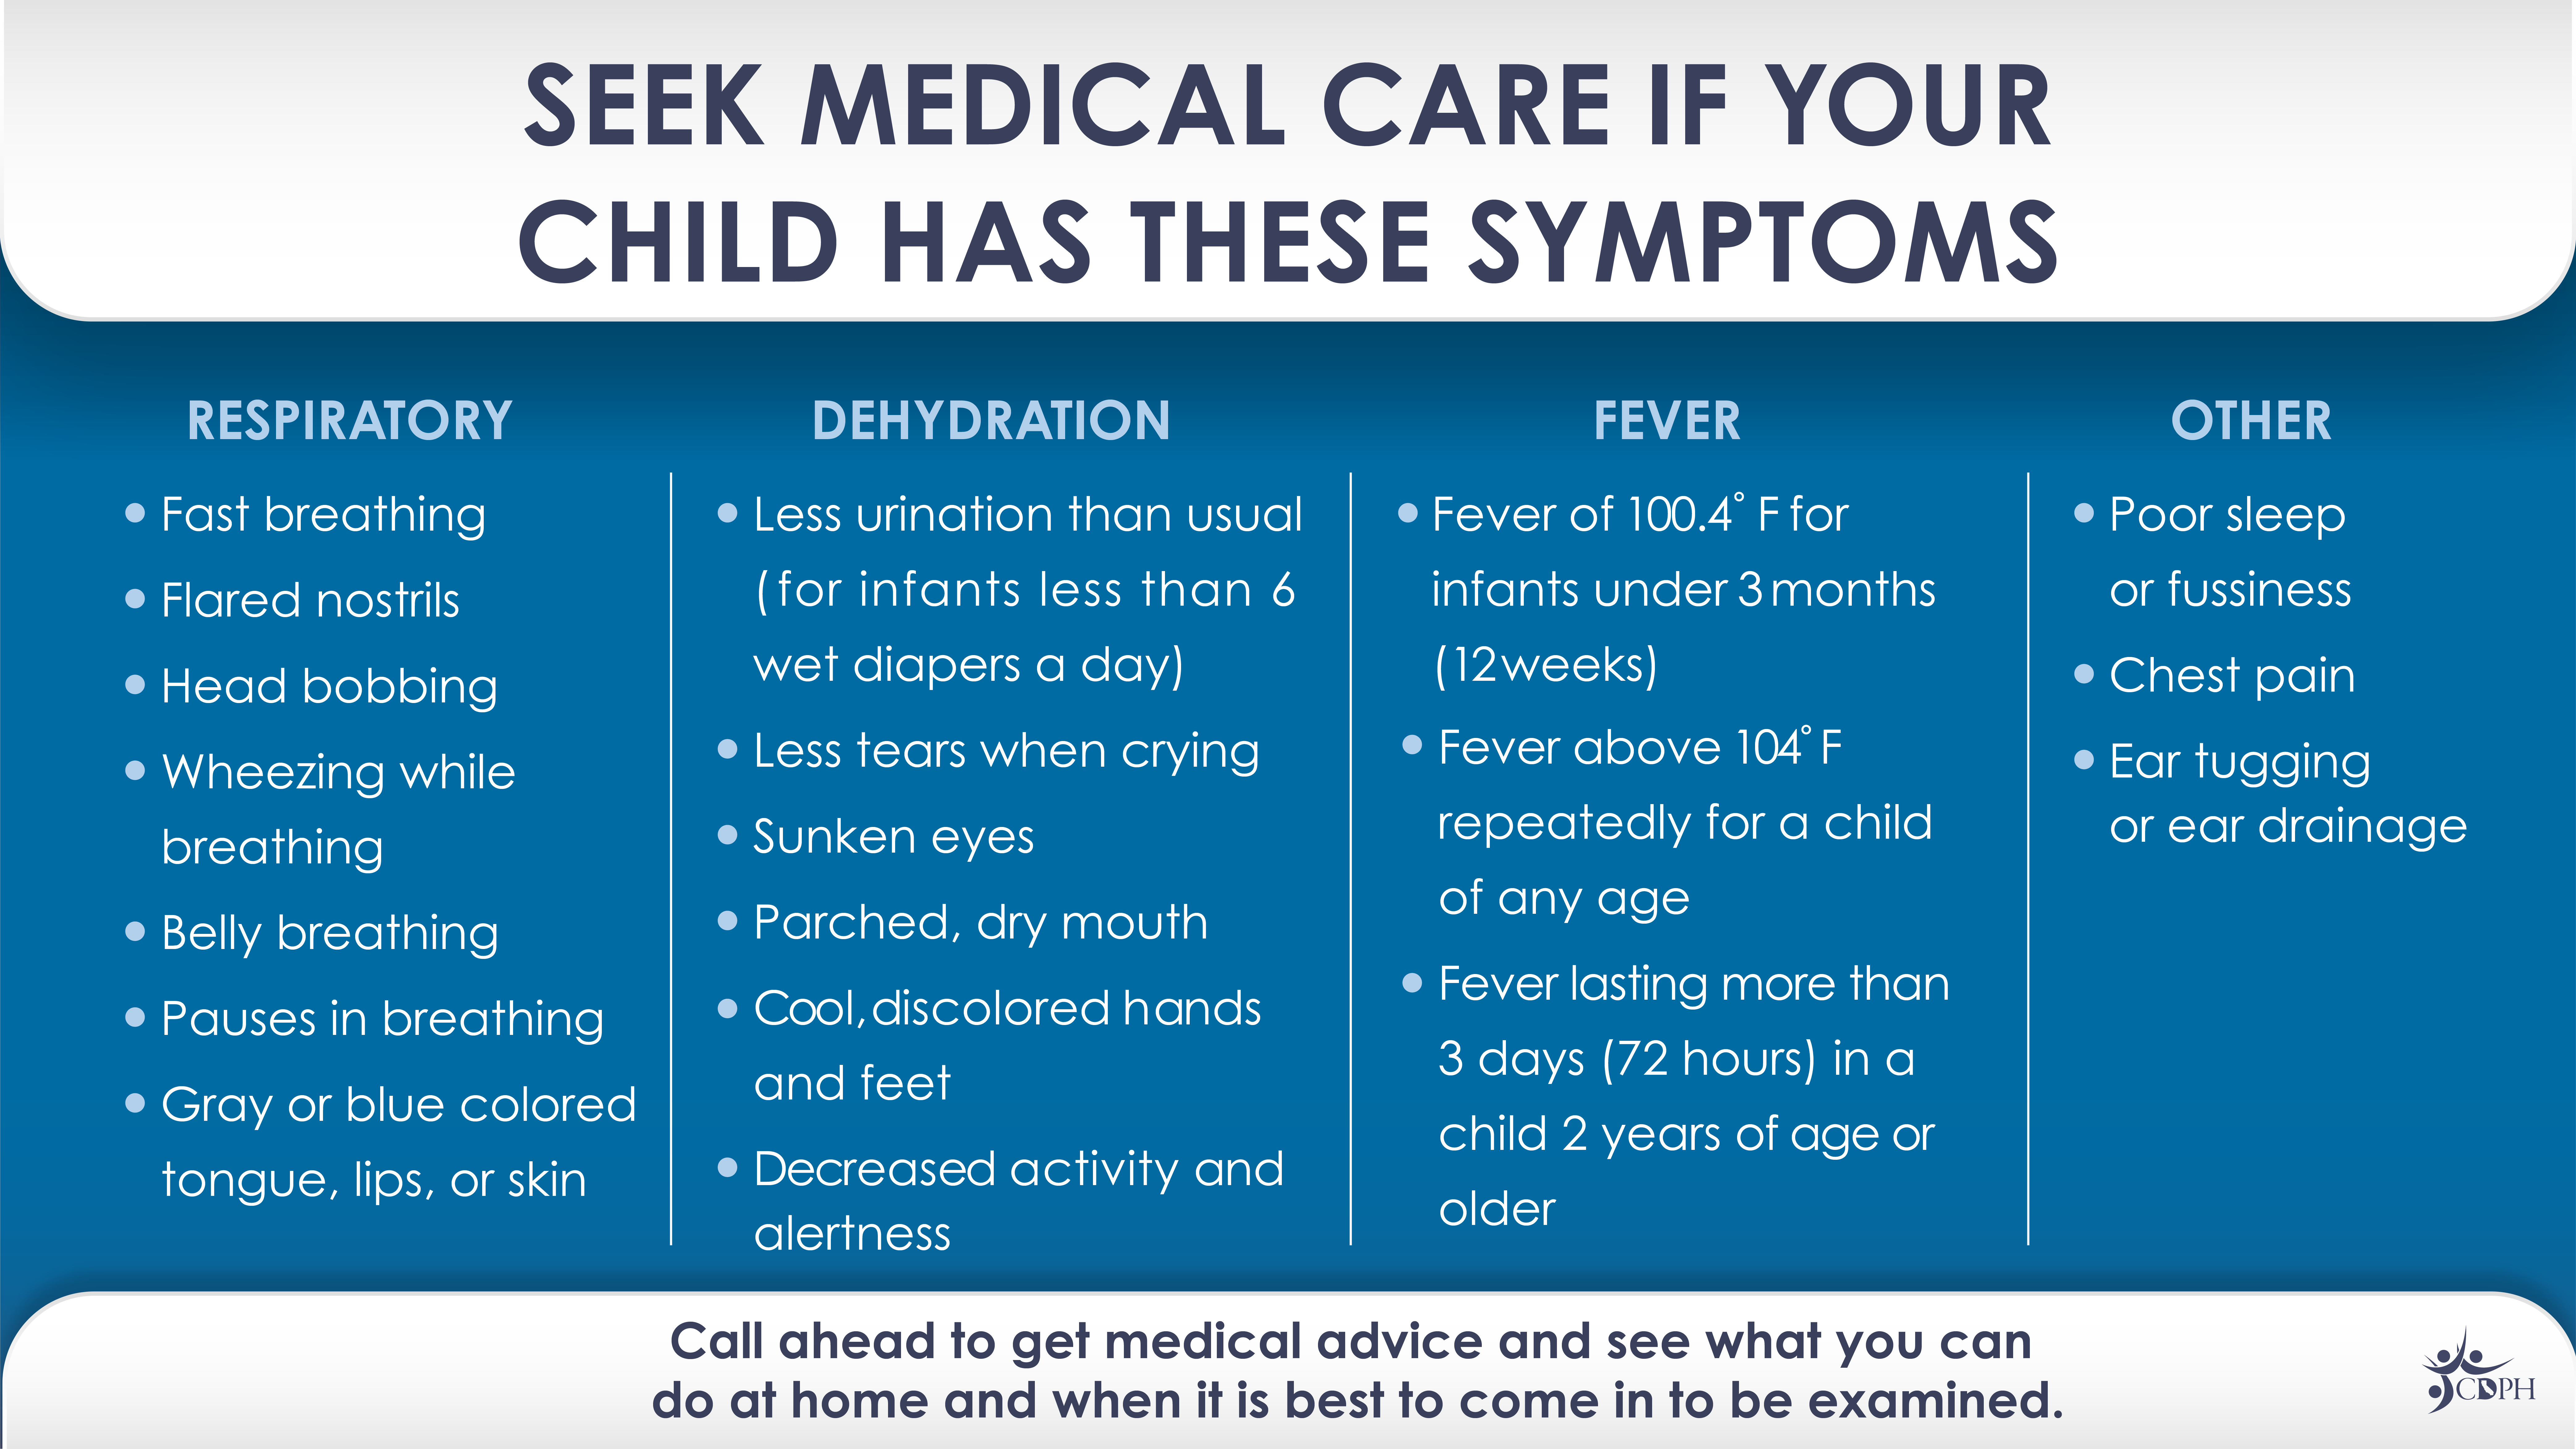 Seek medical care if your child has symptoms